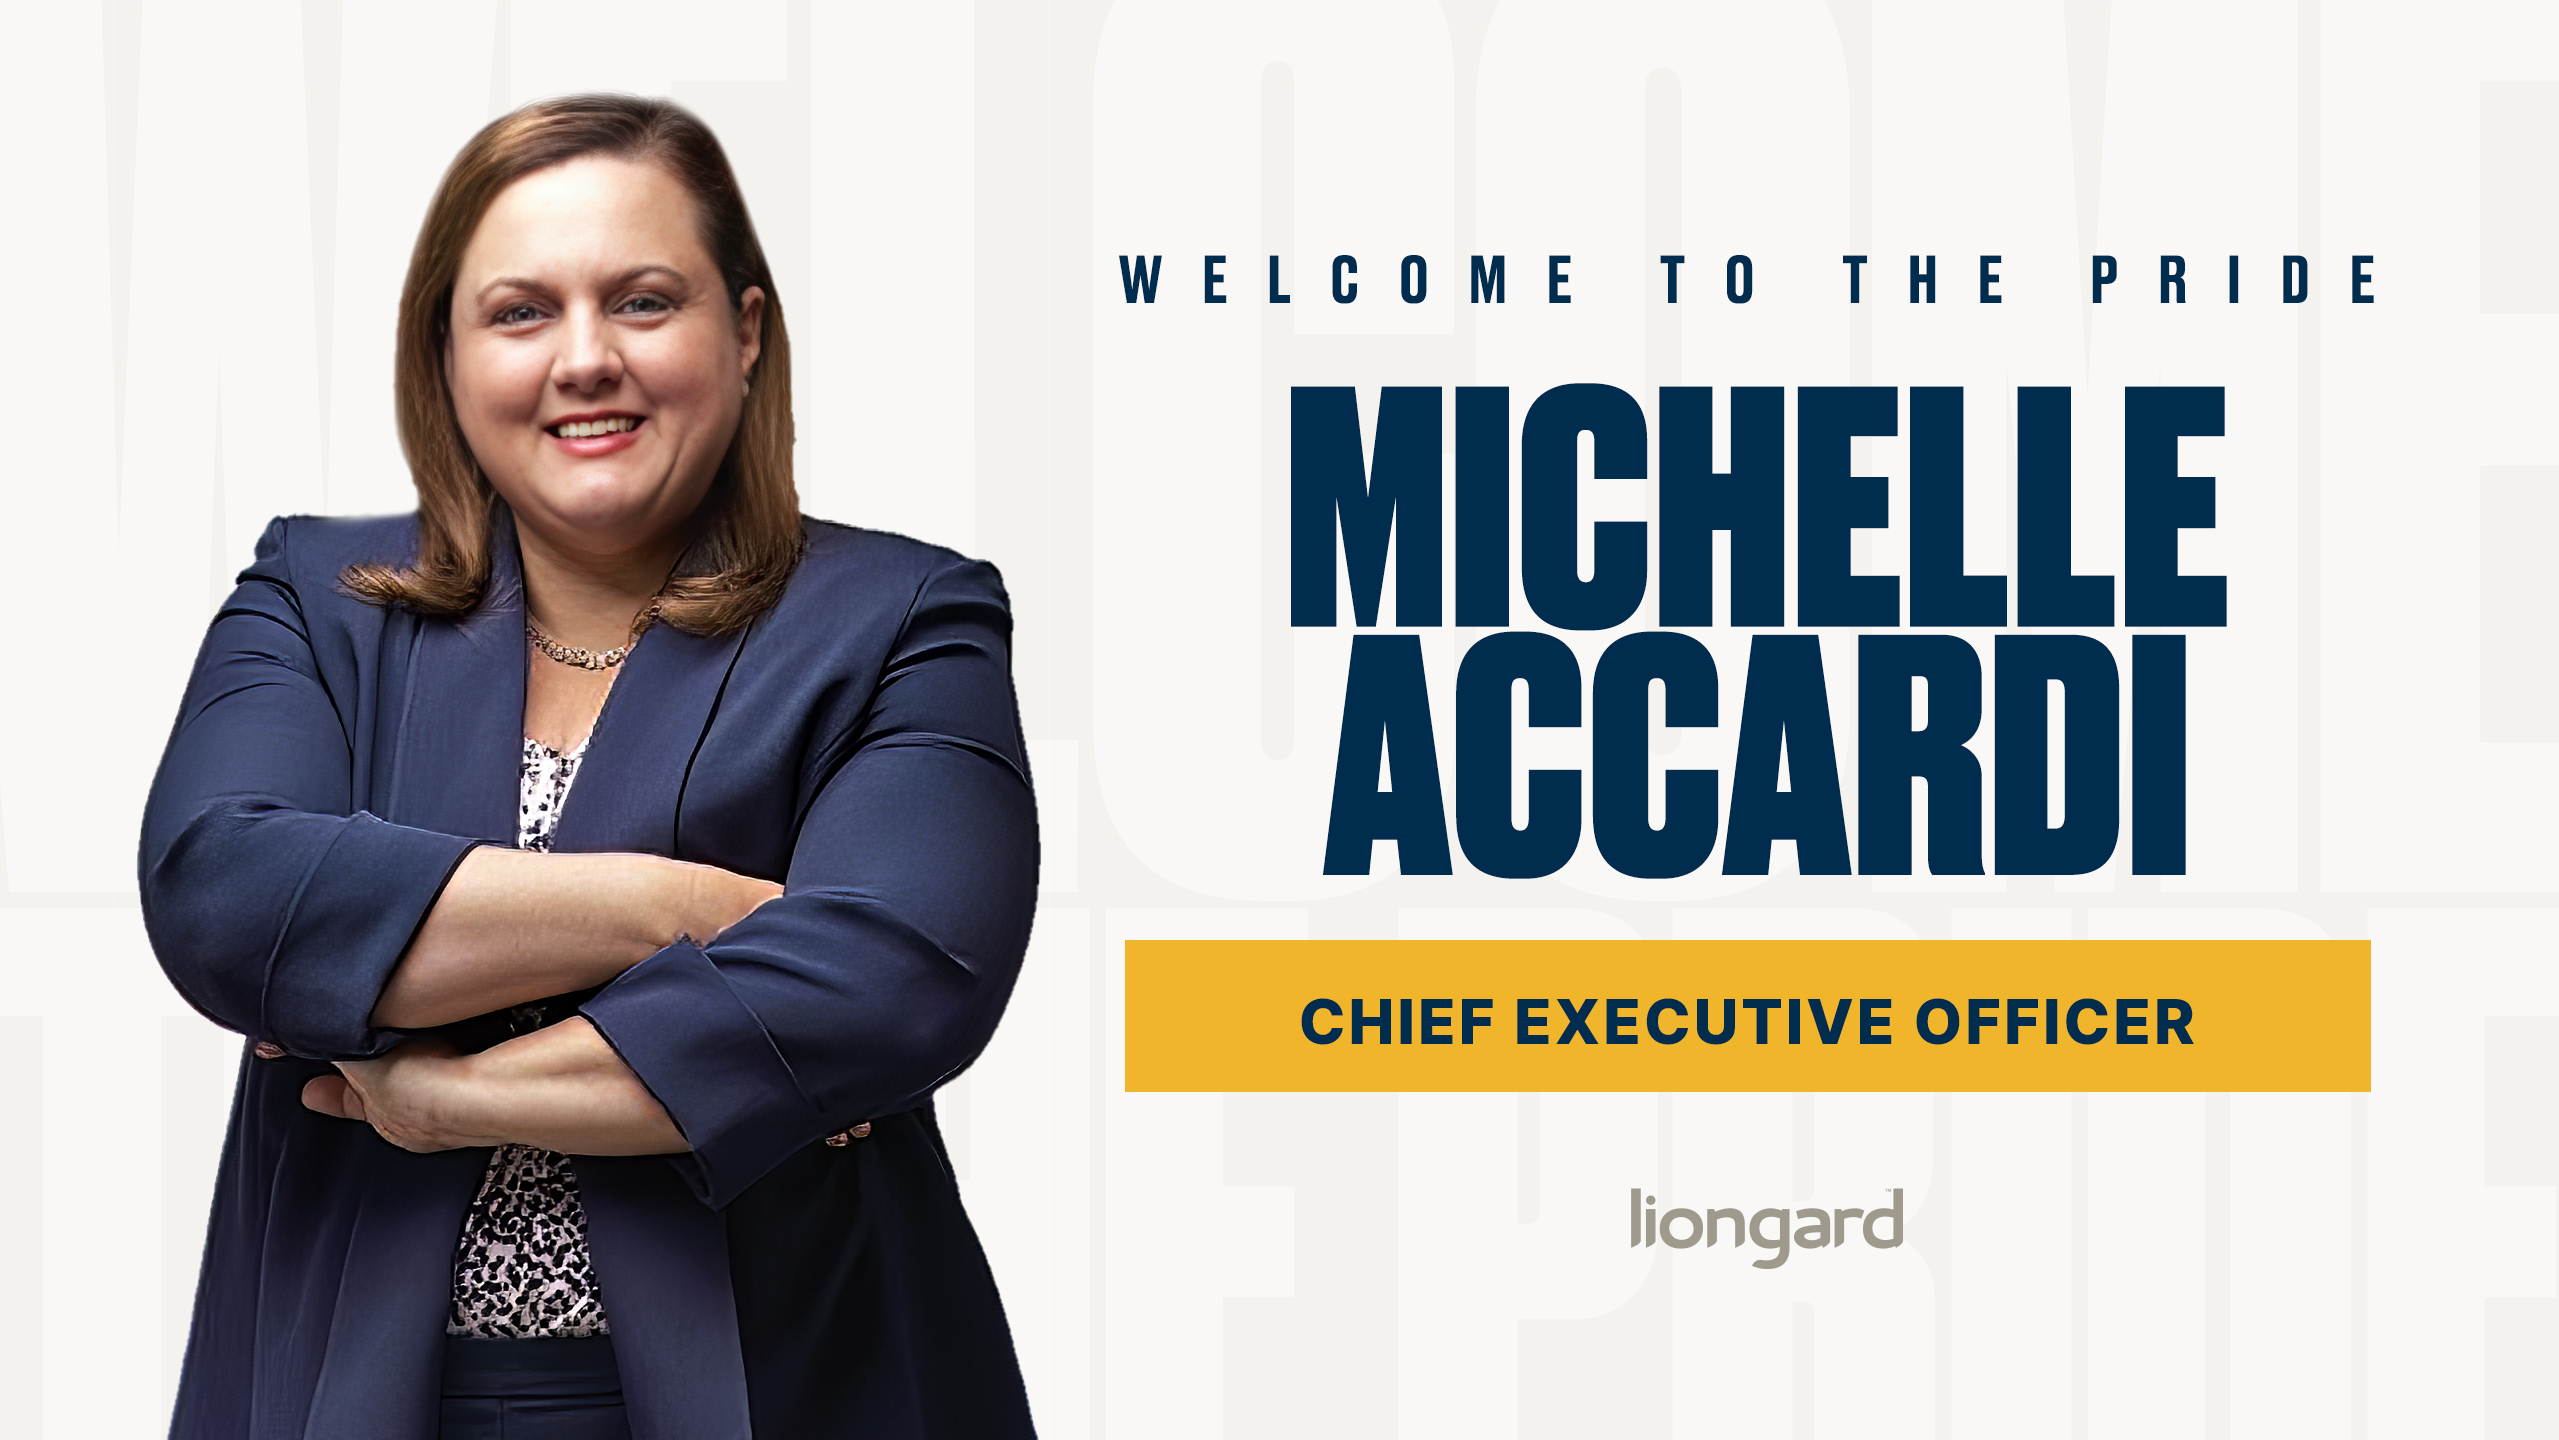 Welcome to the Pride Michelle Accardi. Liongard's new CEO.